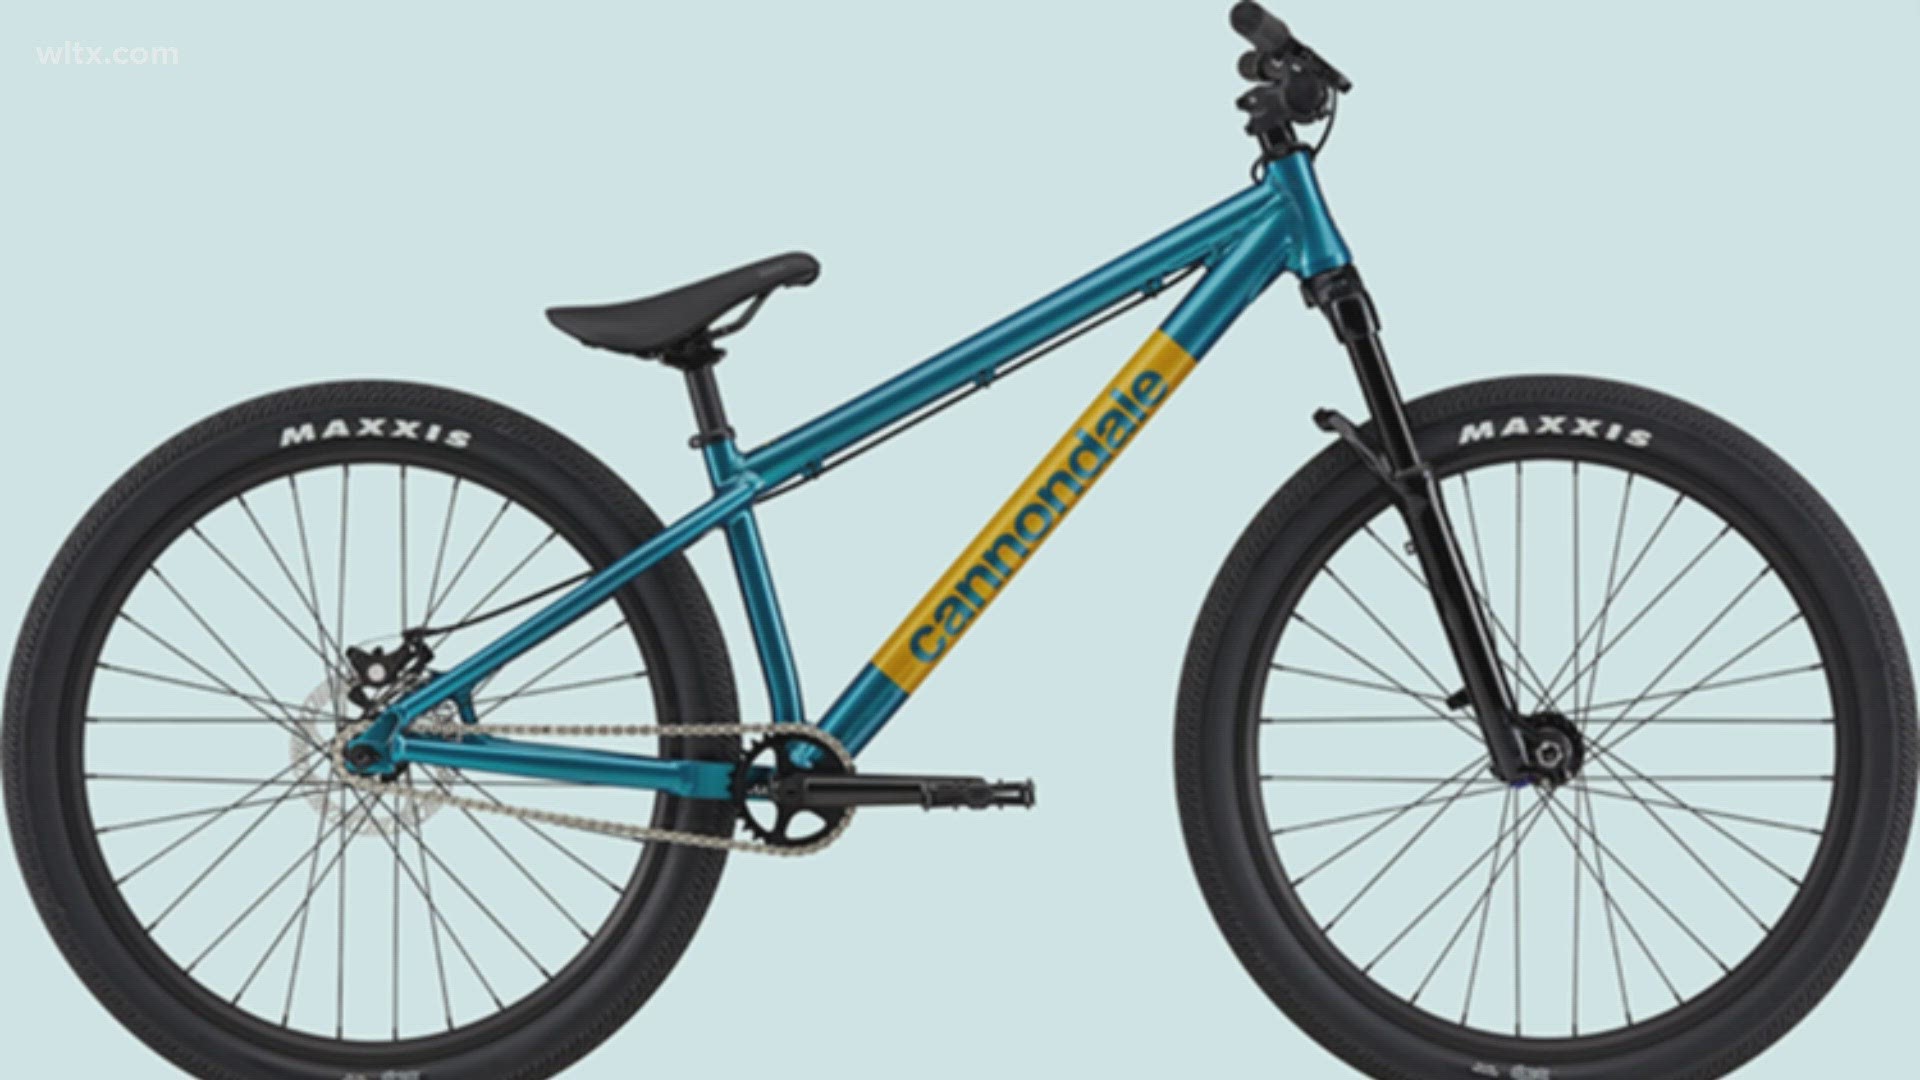 The recalled model is for the year 2021-2023 Cannondale 26 Dave bicycles.